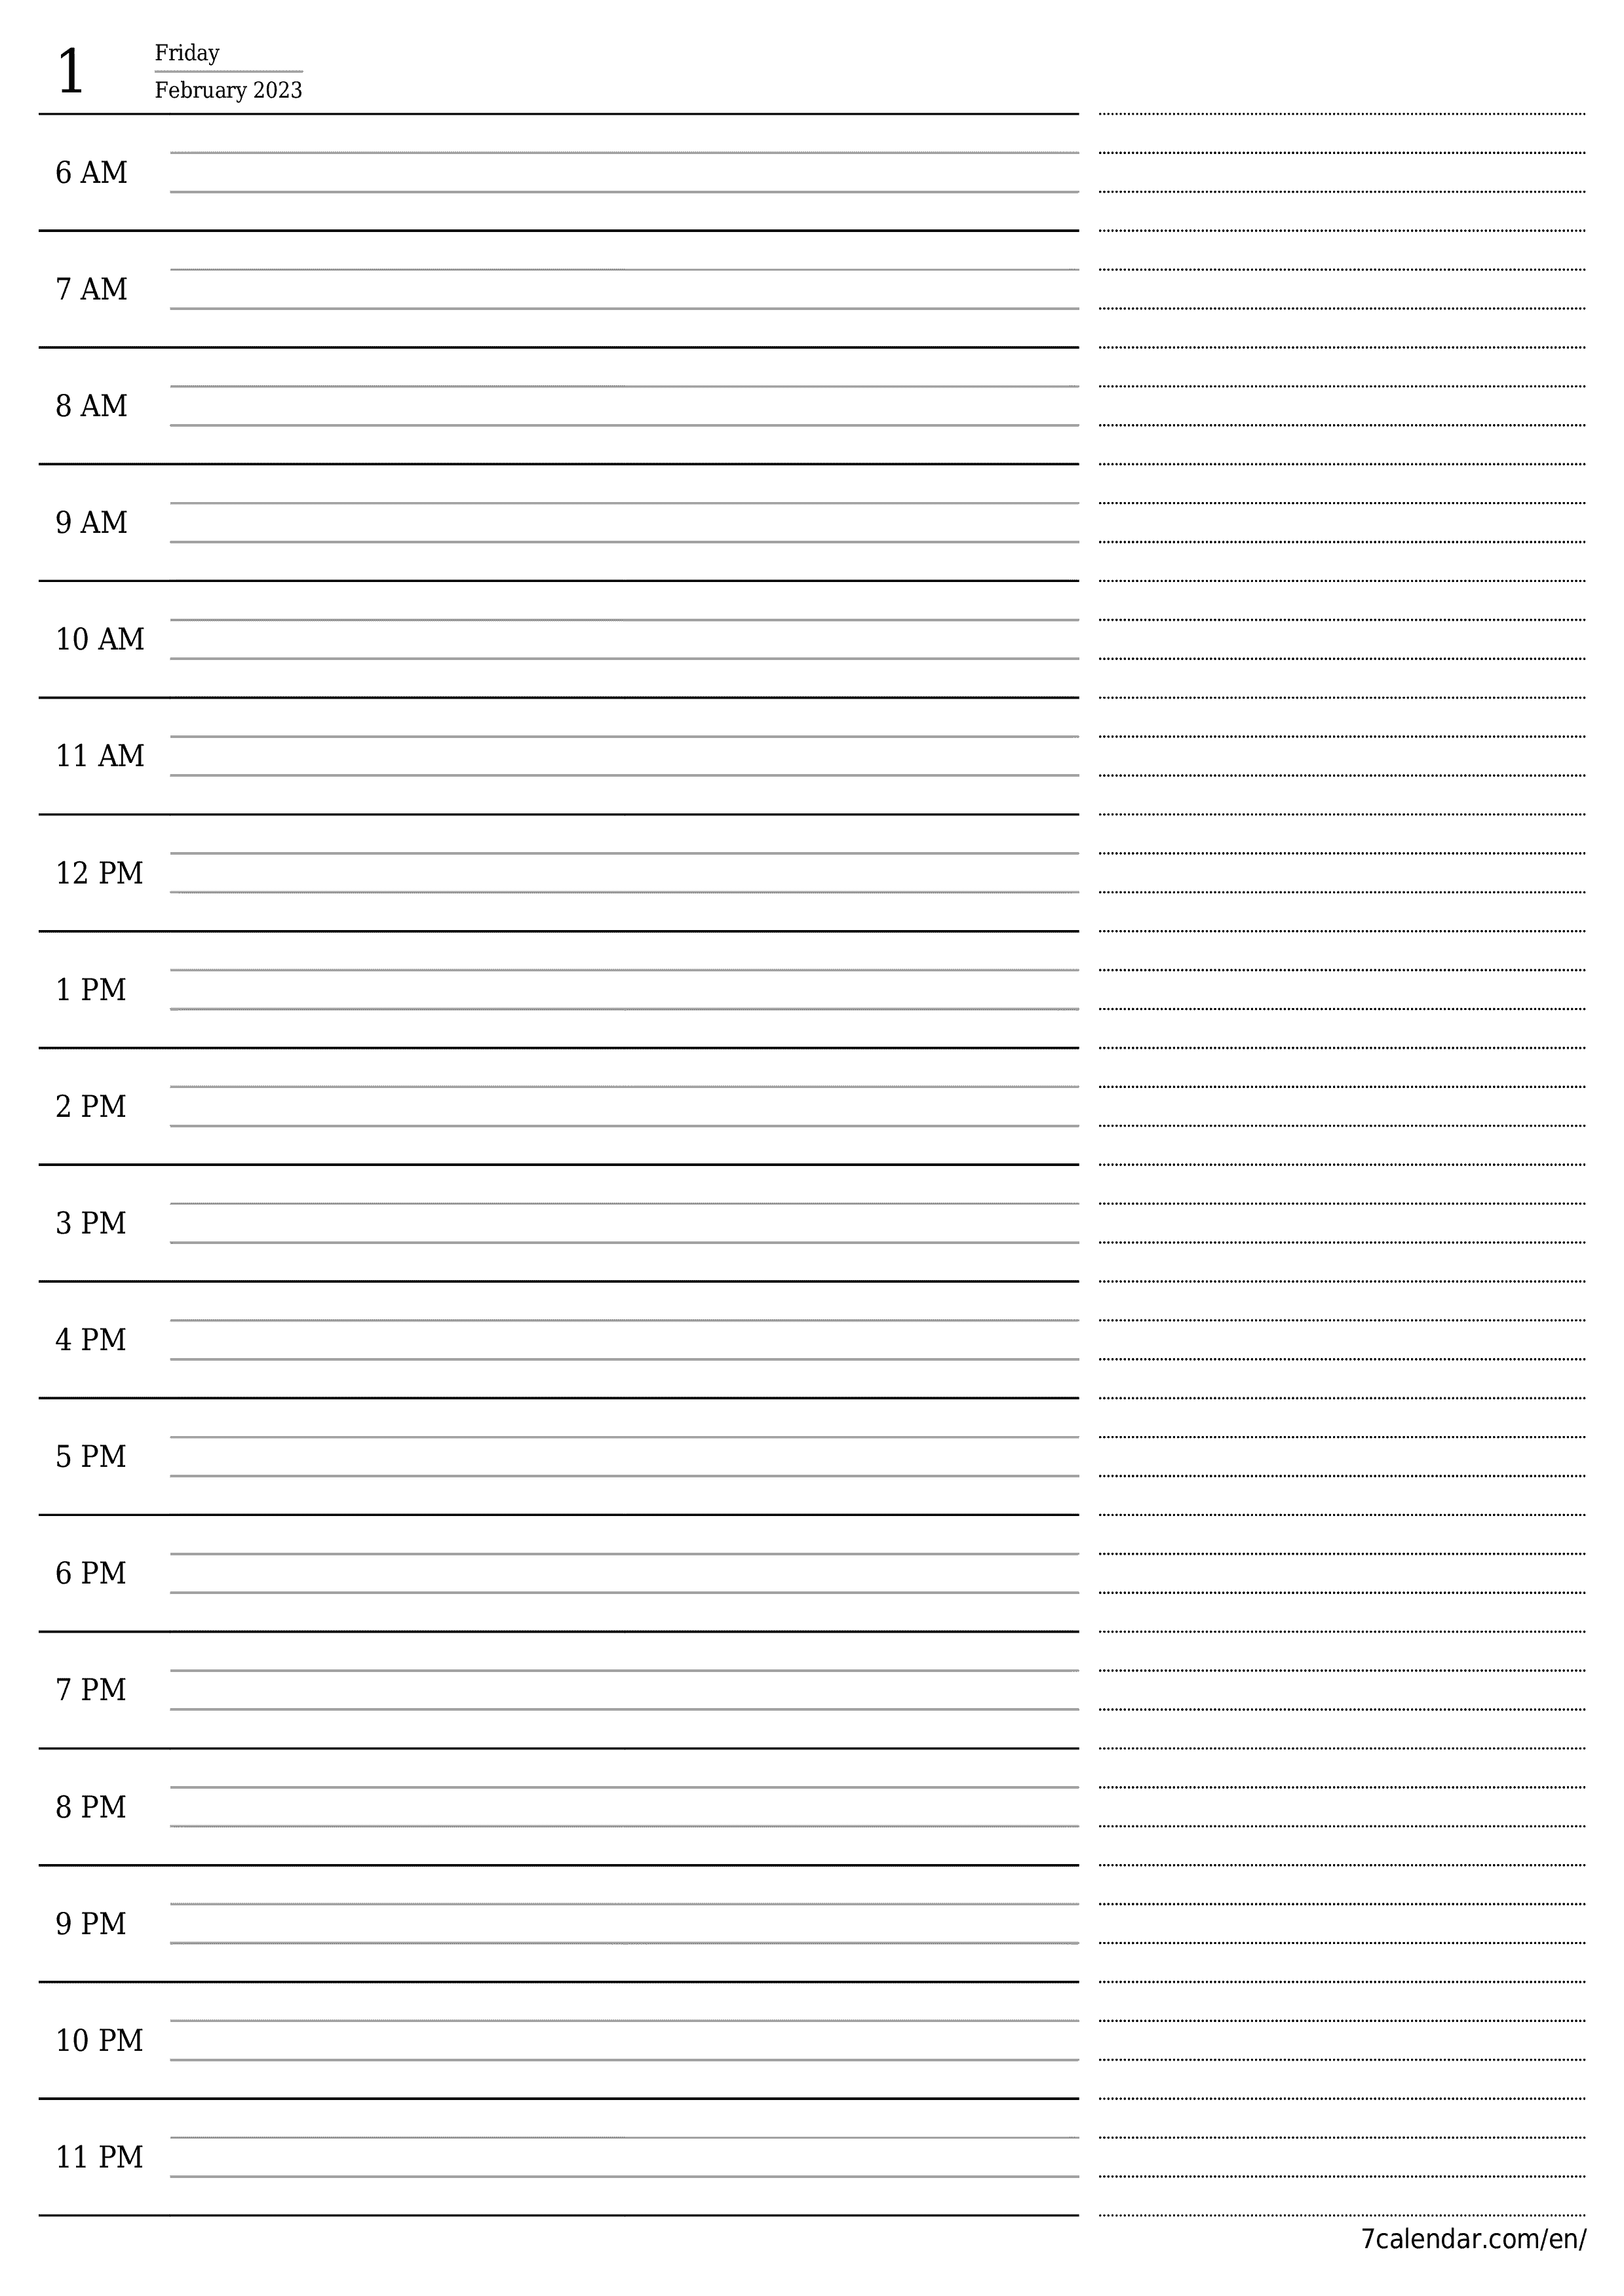 Blank daily printable calendar and planner for day February 2023 with notes, save and print to PDF PNG English - 7calendar.com